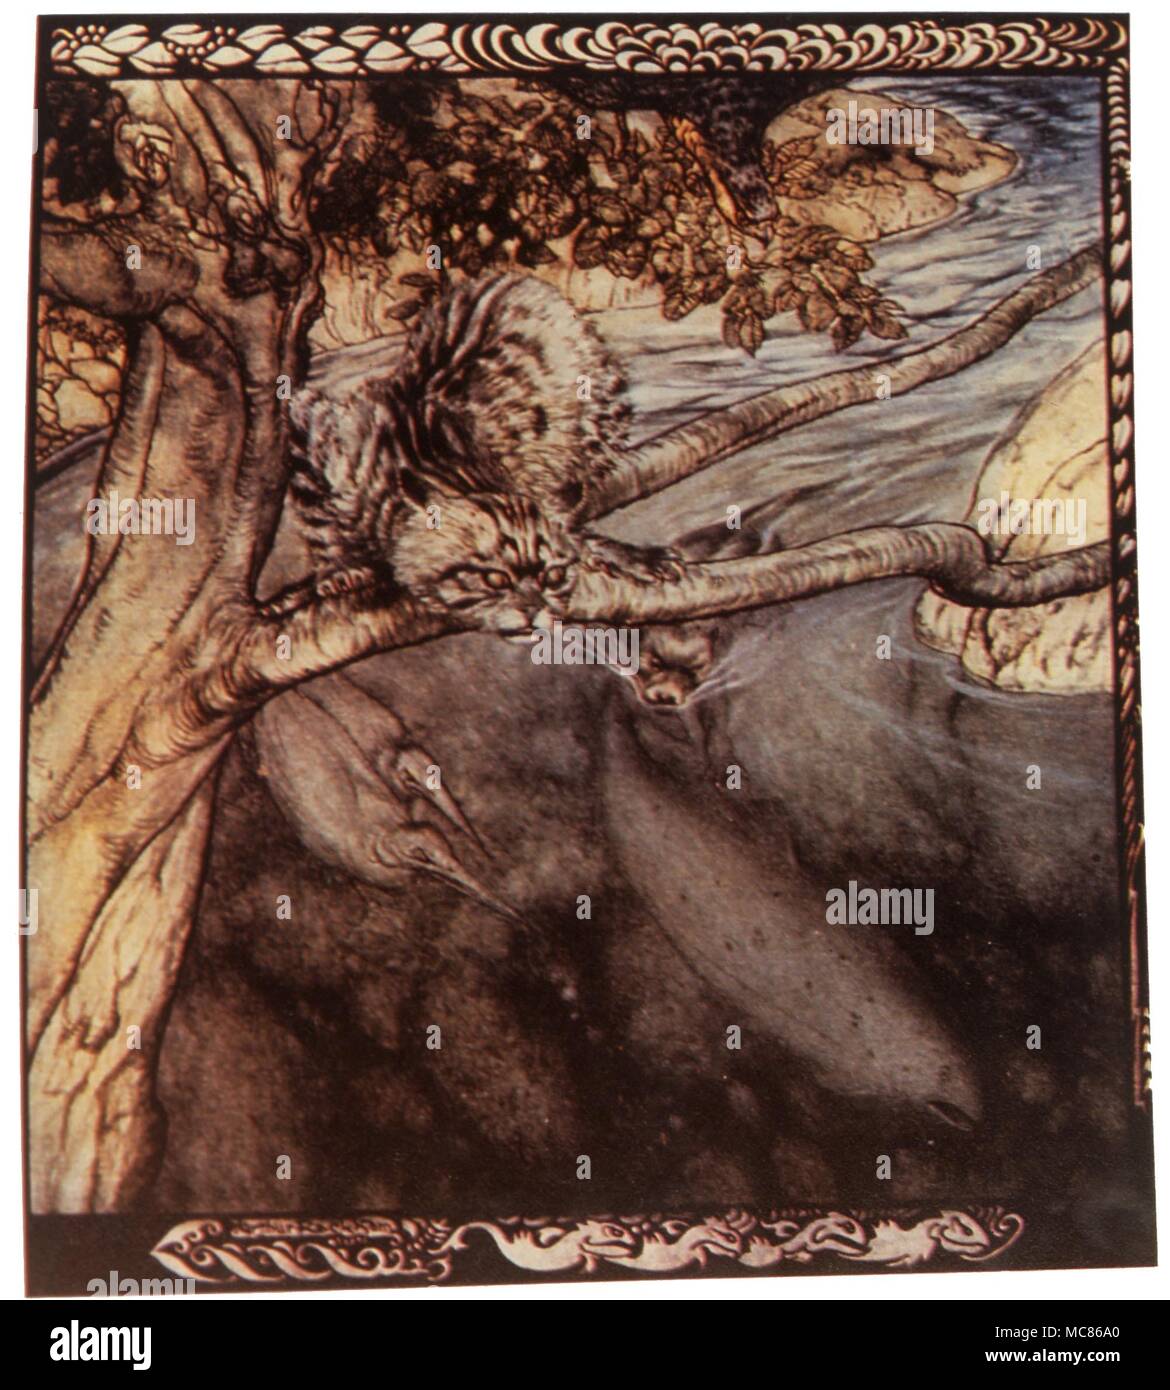 Reincarnation The repeated earth-lives of Bran, who is here dwelling in his avatarformas as Salmon. Illustration by Arthur Rackham for Stephen's 'Irish Fairy Tales' Stock Photo